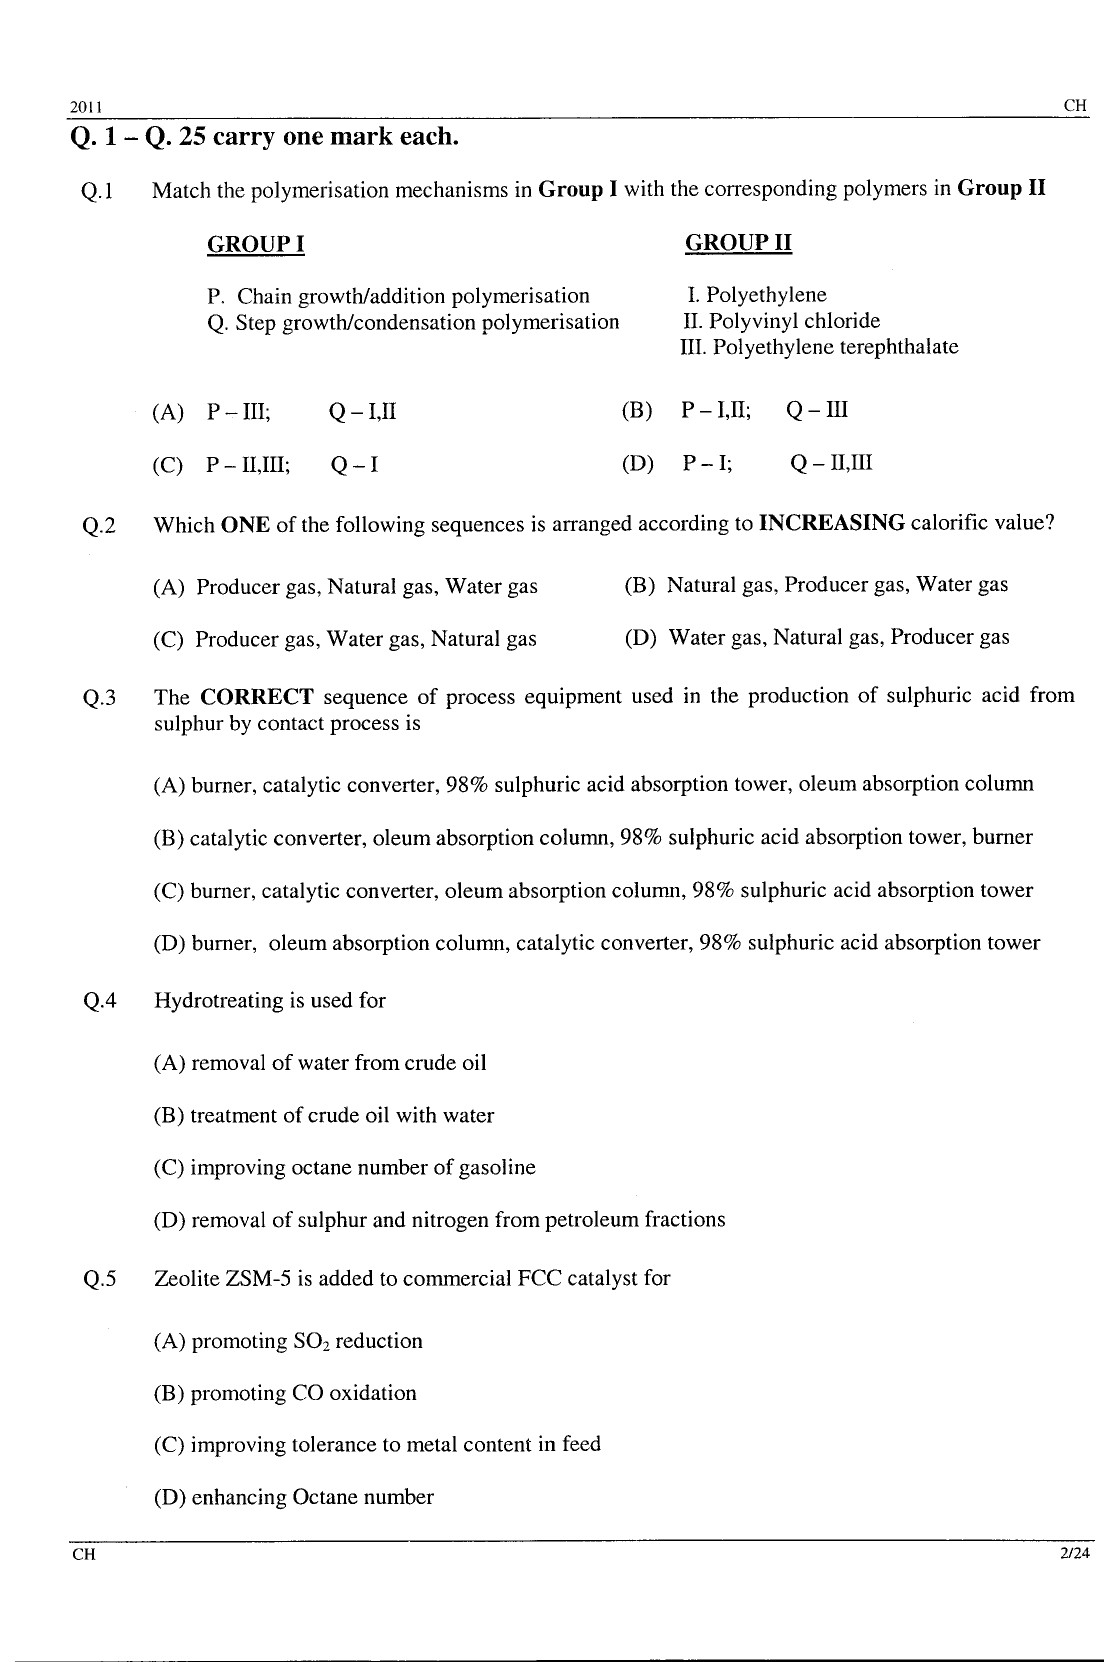 GATE Exam Question Paper 2011 Chemical Engineering 2